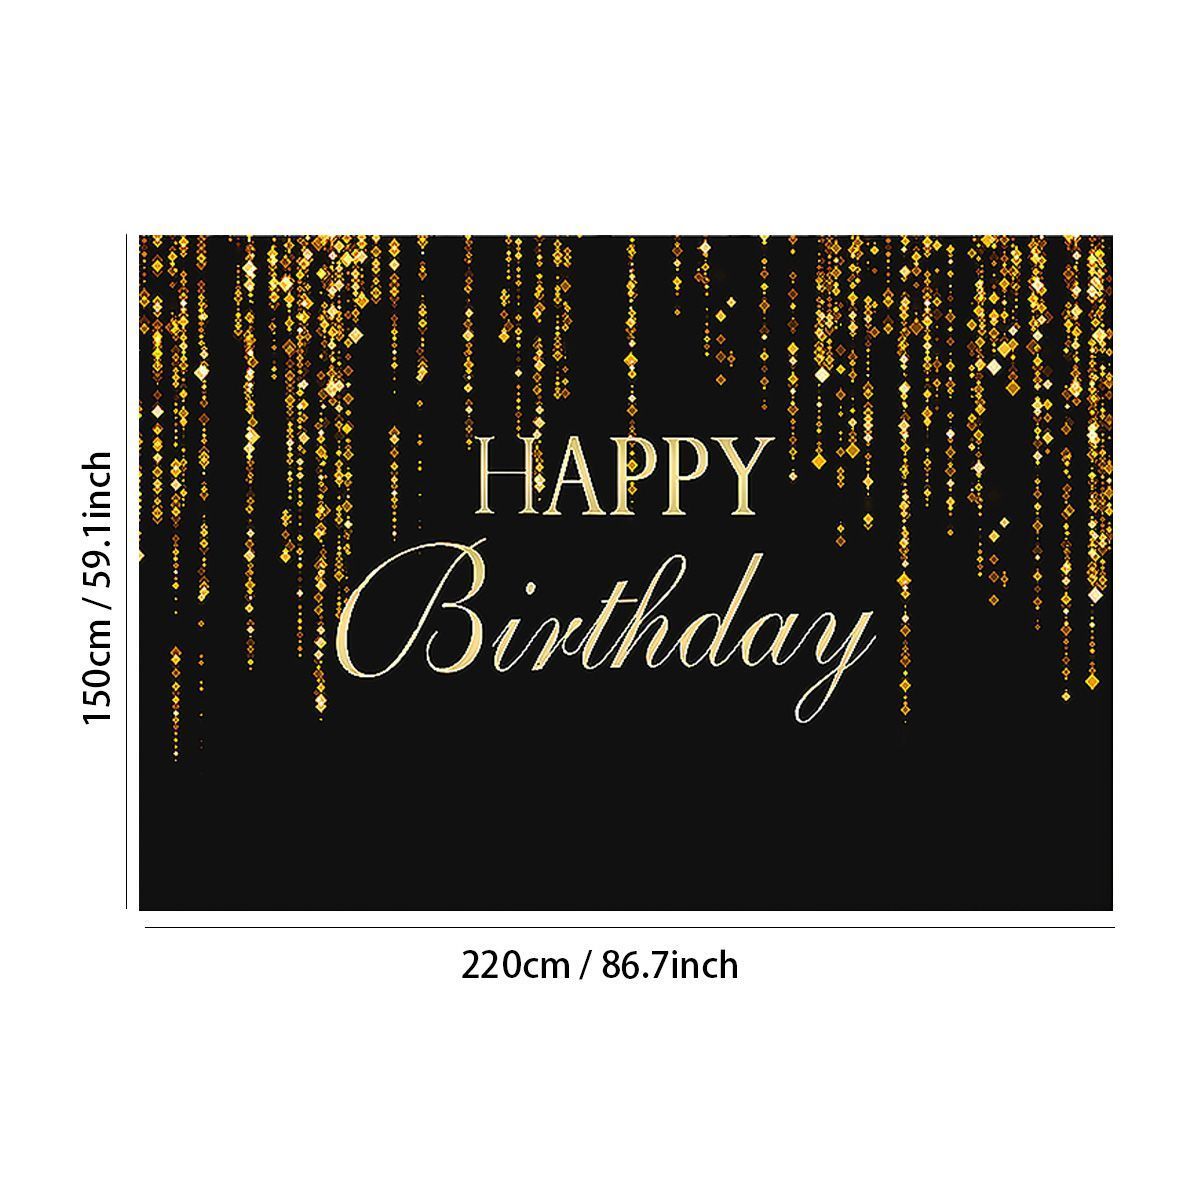 Happy-Birthday-Photography-Backdrops-Glitter-Sequin-Spots-Background-Cloth-for-Party-Photograph-Back-1763689